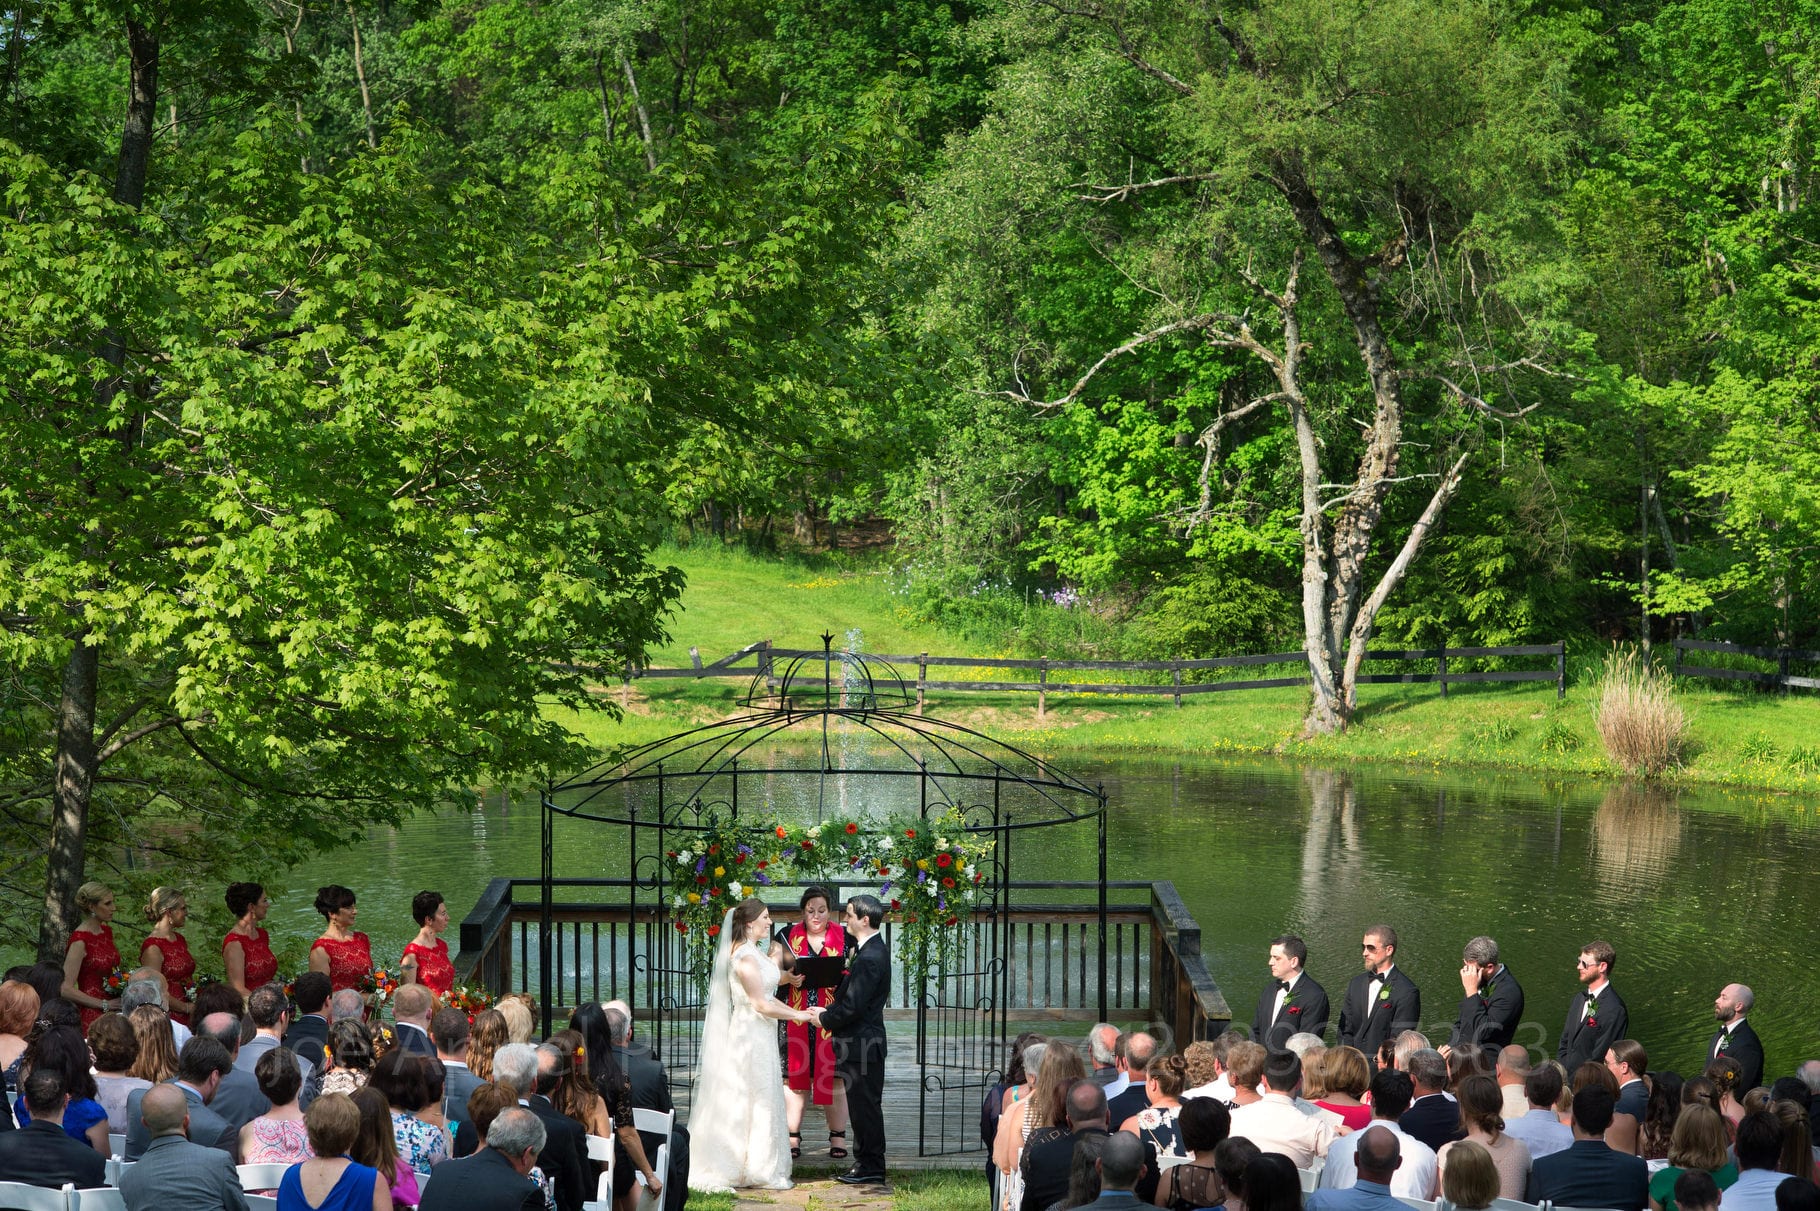 view of the ceremony site in front of the pond at Chanteclaire Farm in Garrett County Maryland during their Chanteclaire Farm Wedding.